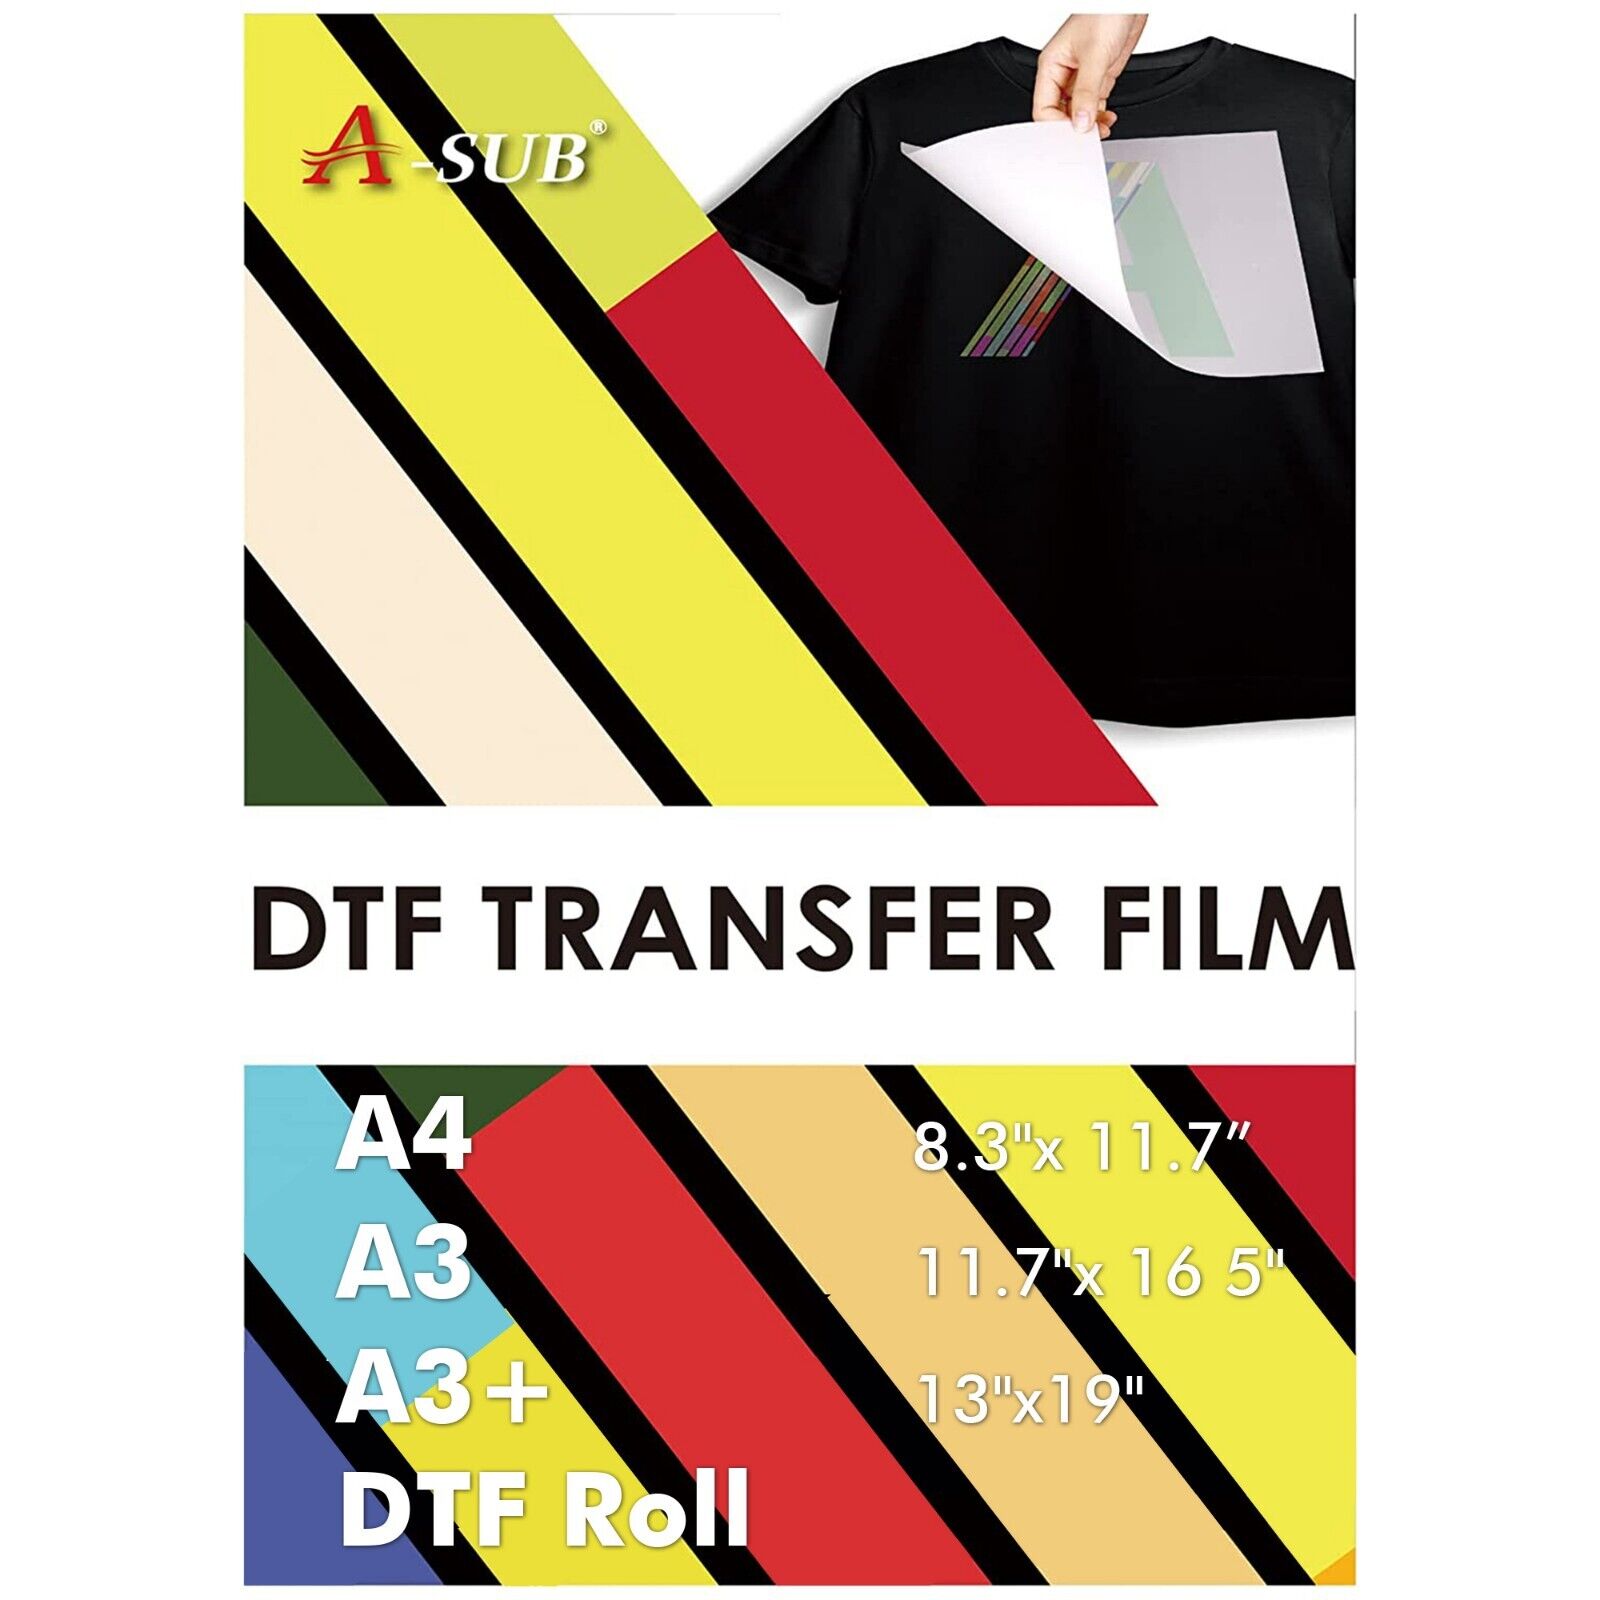 Lot A-SUB DTF Film A4 / A3 / A3+ DTF Transfer Paper, Sublimation Paper for Dark